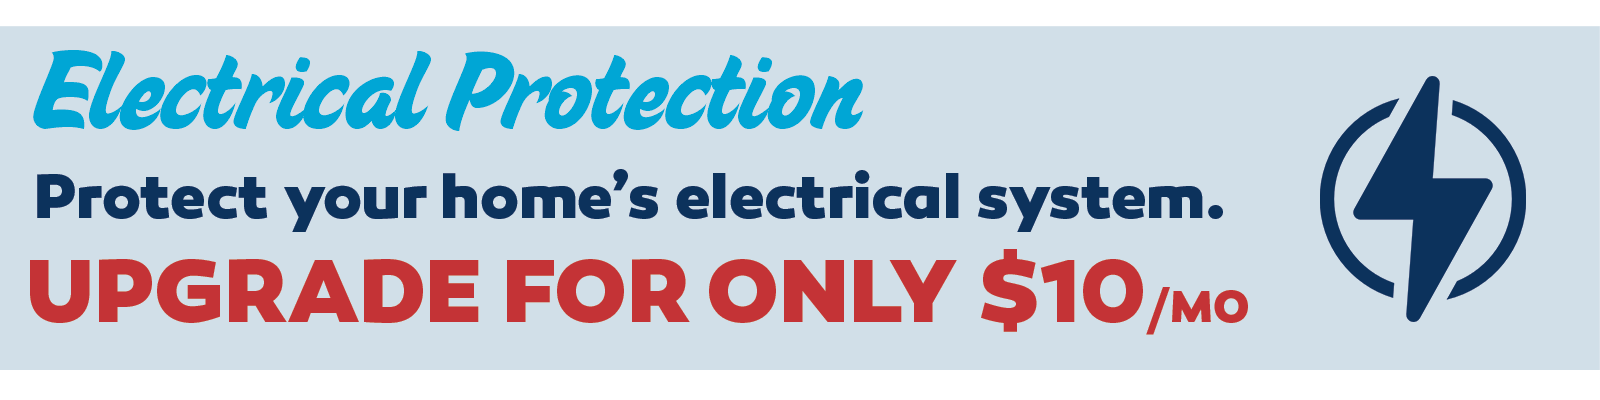 electrical protection price